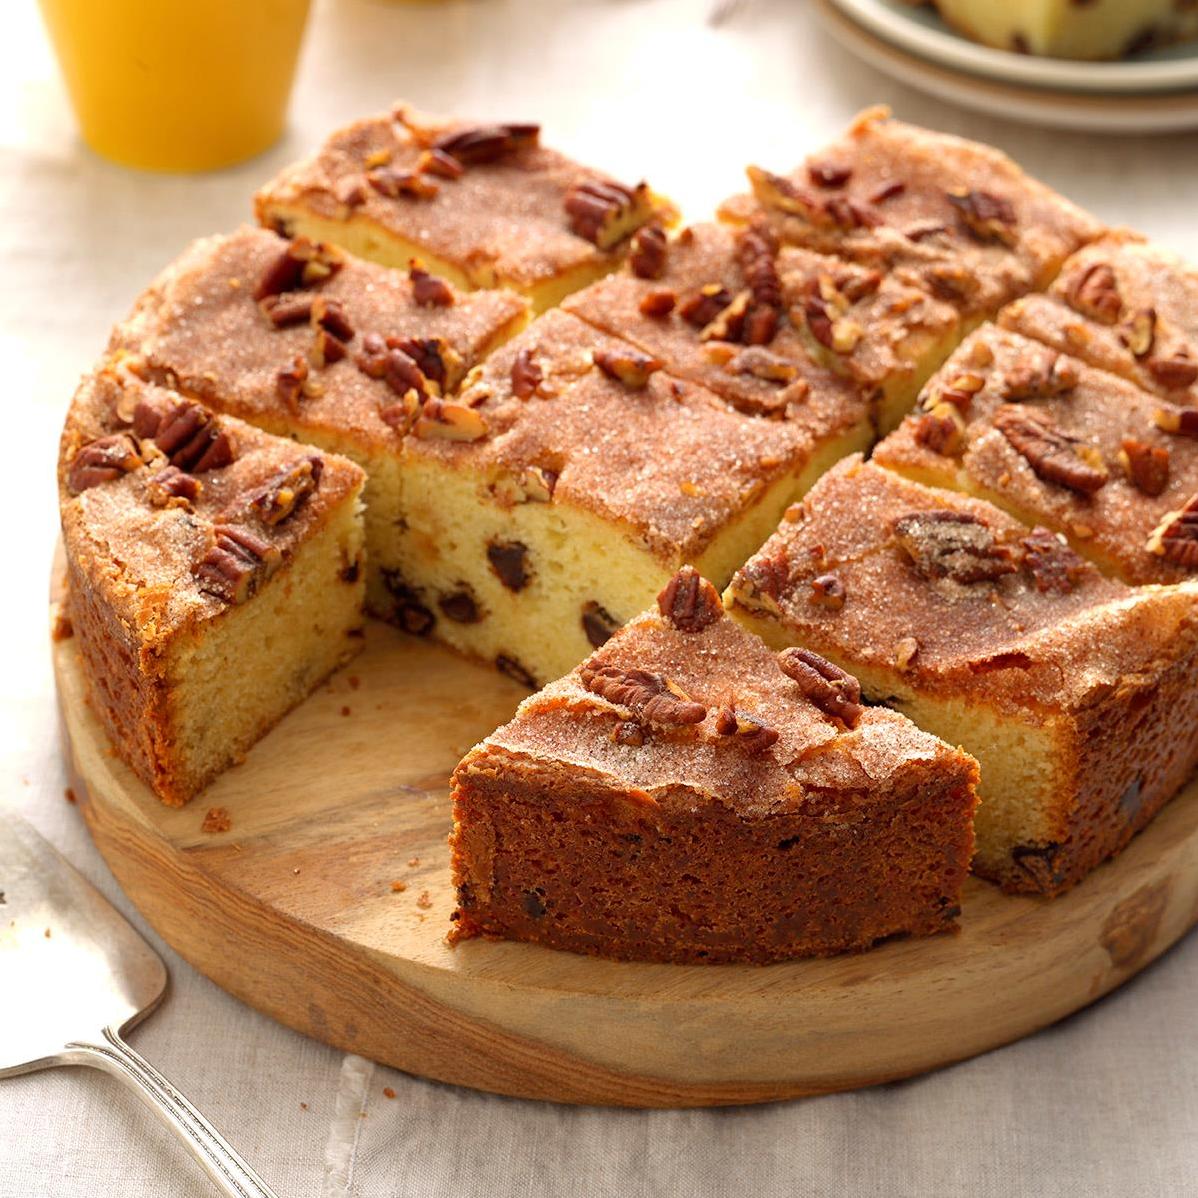  This coffee cake is a guaranteed crowd-pleaser.